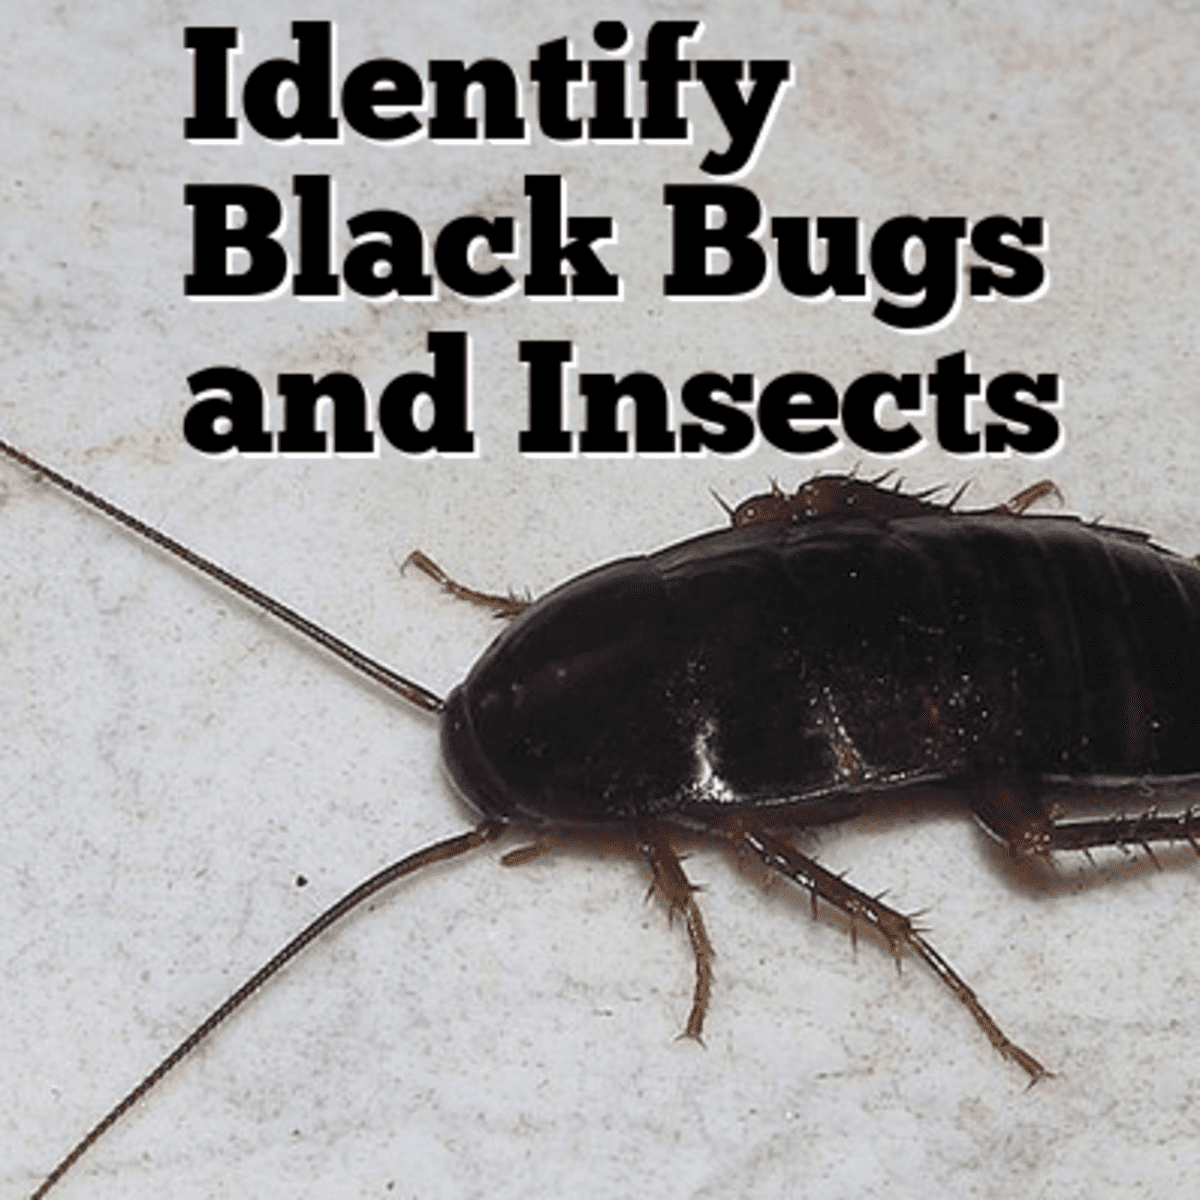 Black Bug and Insect Identification (With Photos) - Owlcation